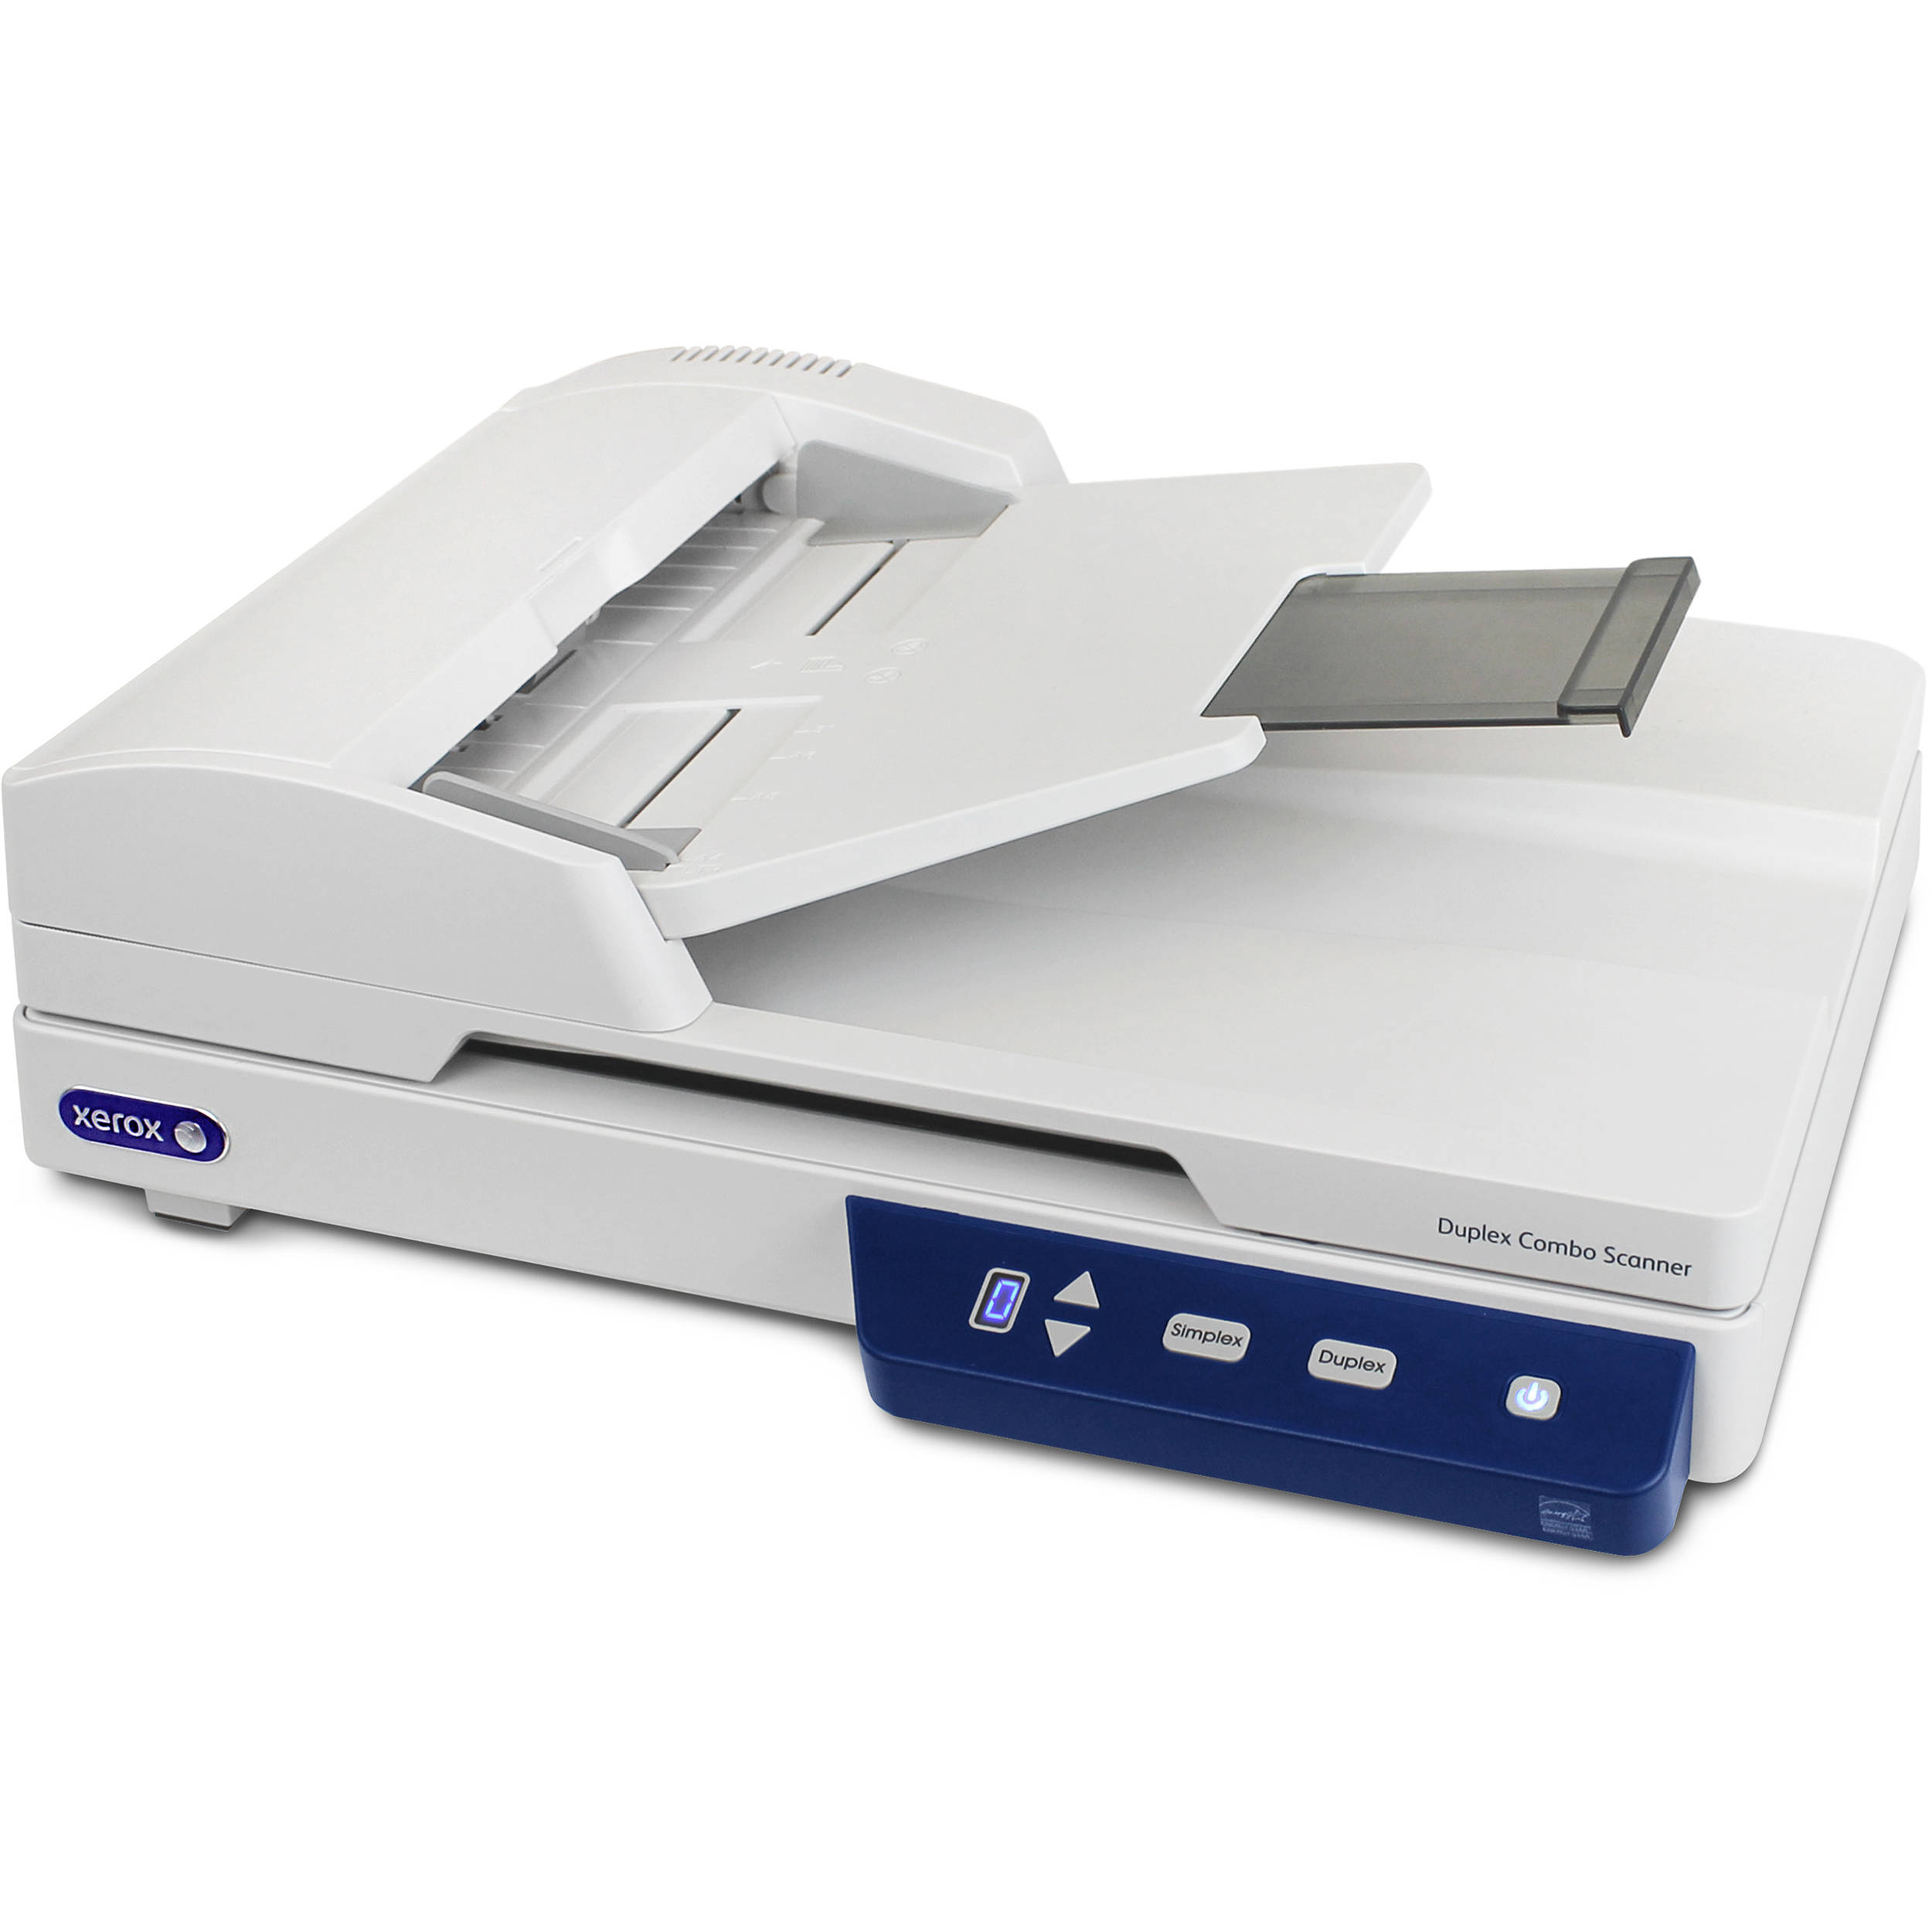 Xerox Duplex Combo Scanner For PC And Mac, USB Flatbed Document Scanner